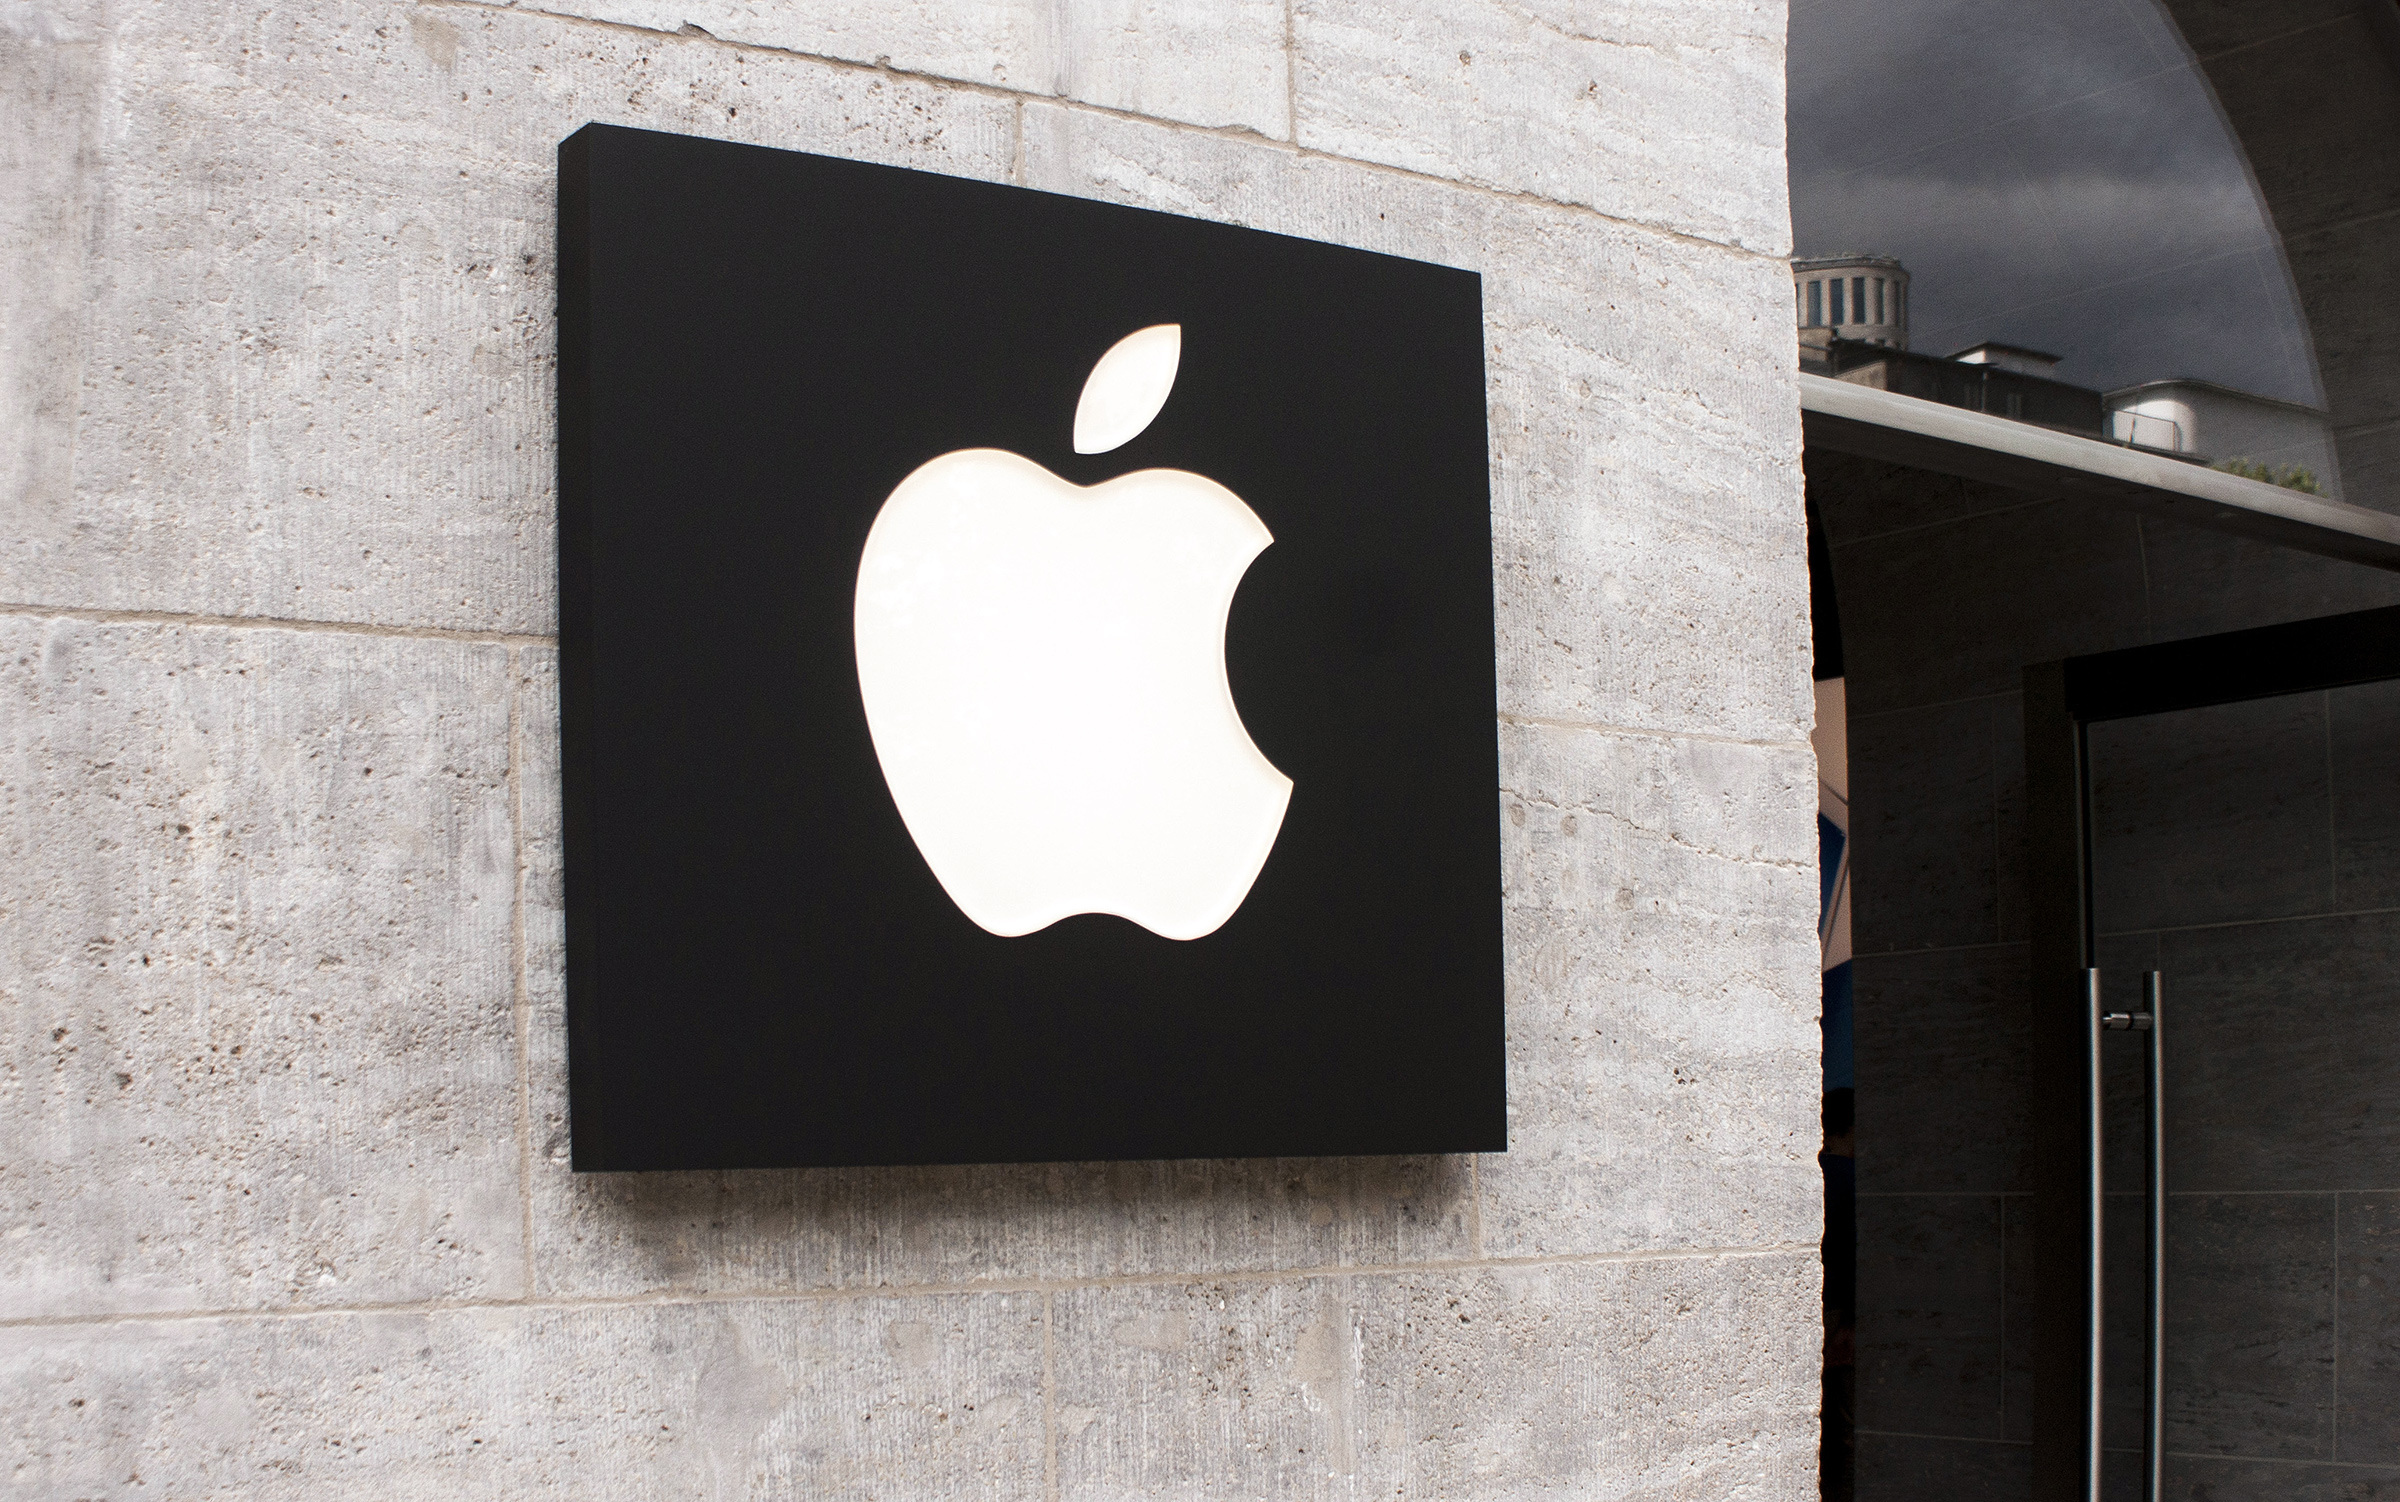 Apple reports revenue of $ 49.6 billion and profit of $ 10.7 billion in its third fiscal quarter of 2015 [atualizado 2x]